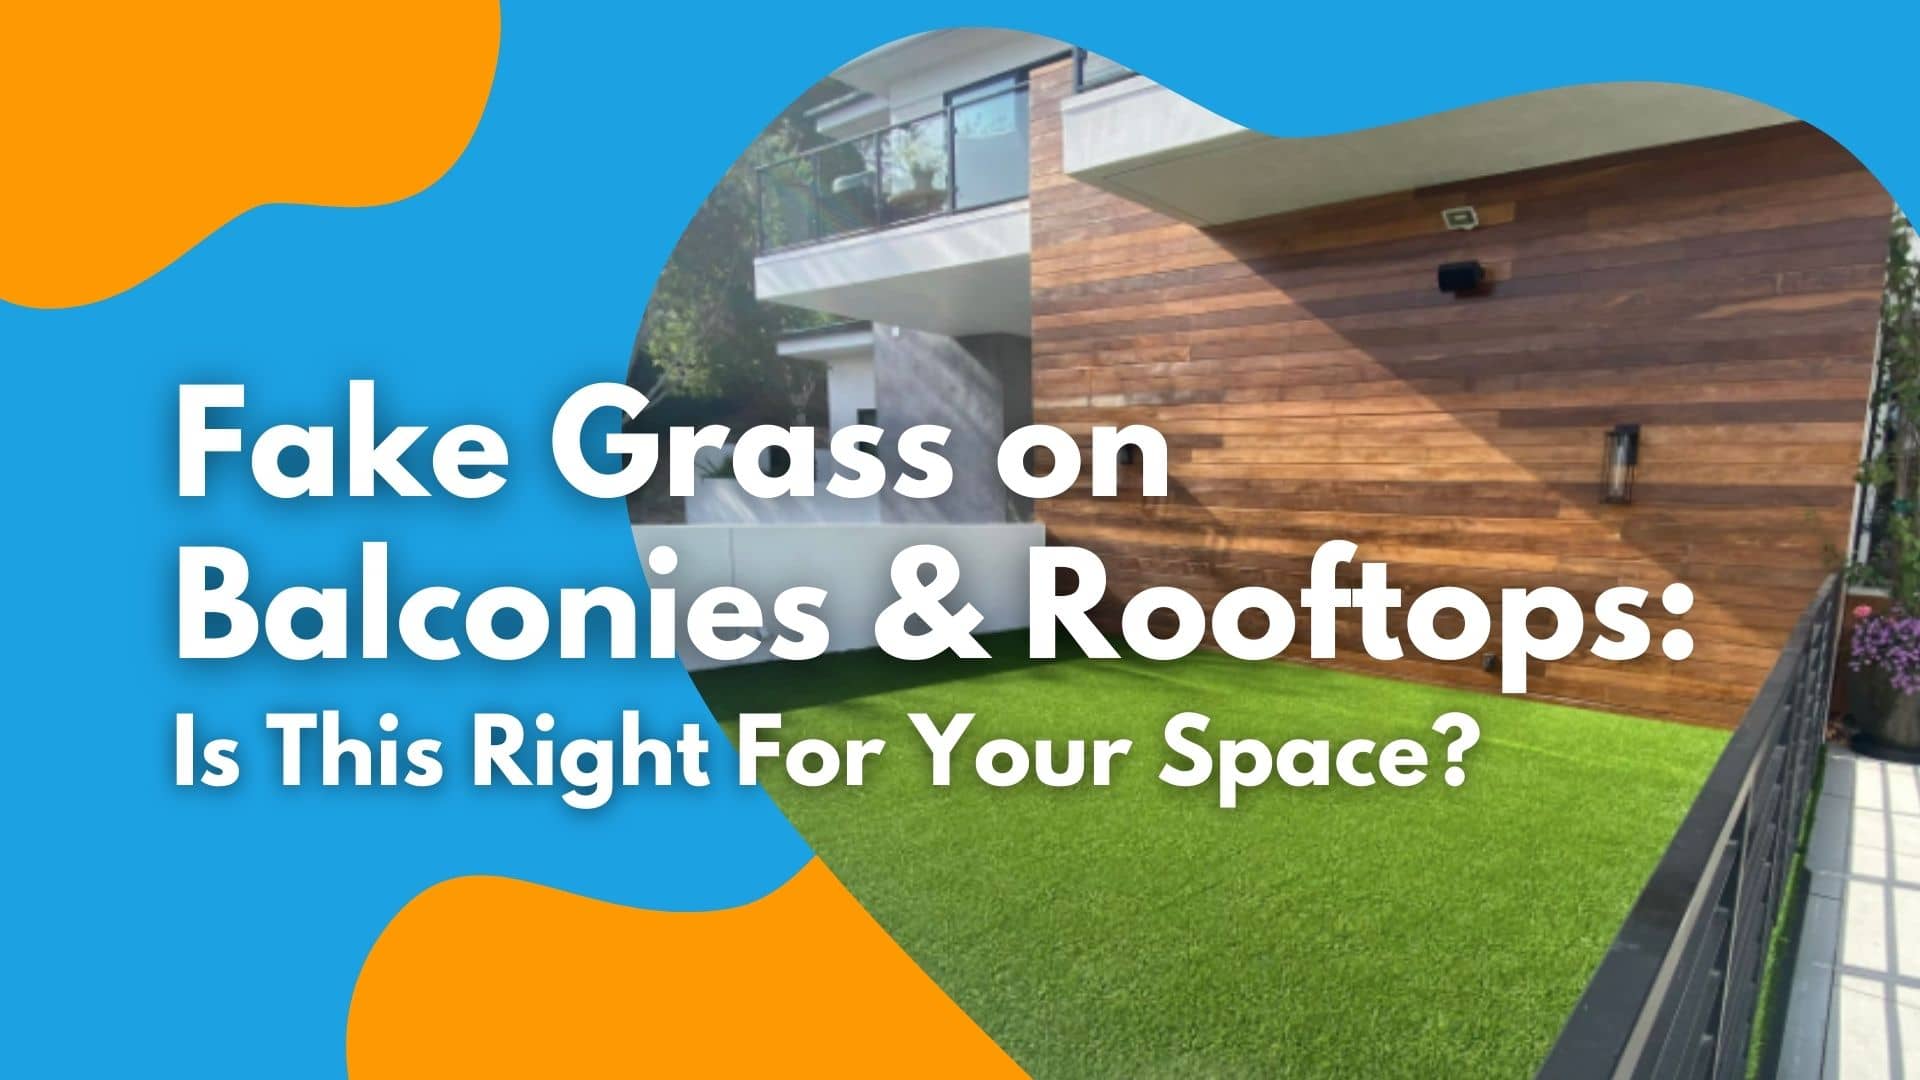 Fake Grass on Balconies and Rooftops: Is This Right For Your Space?